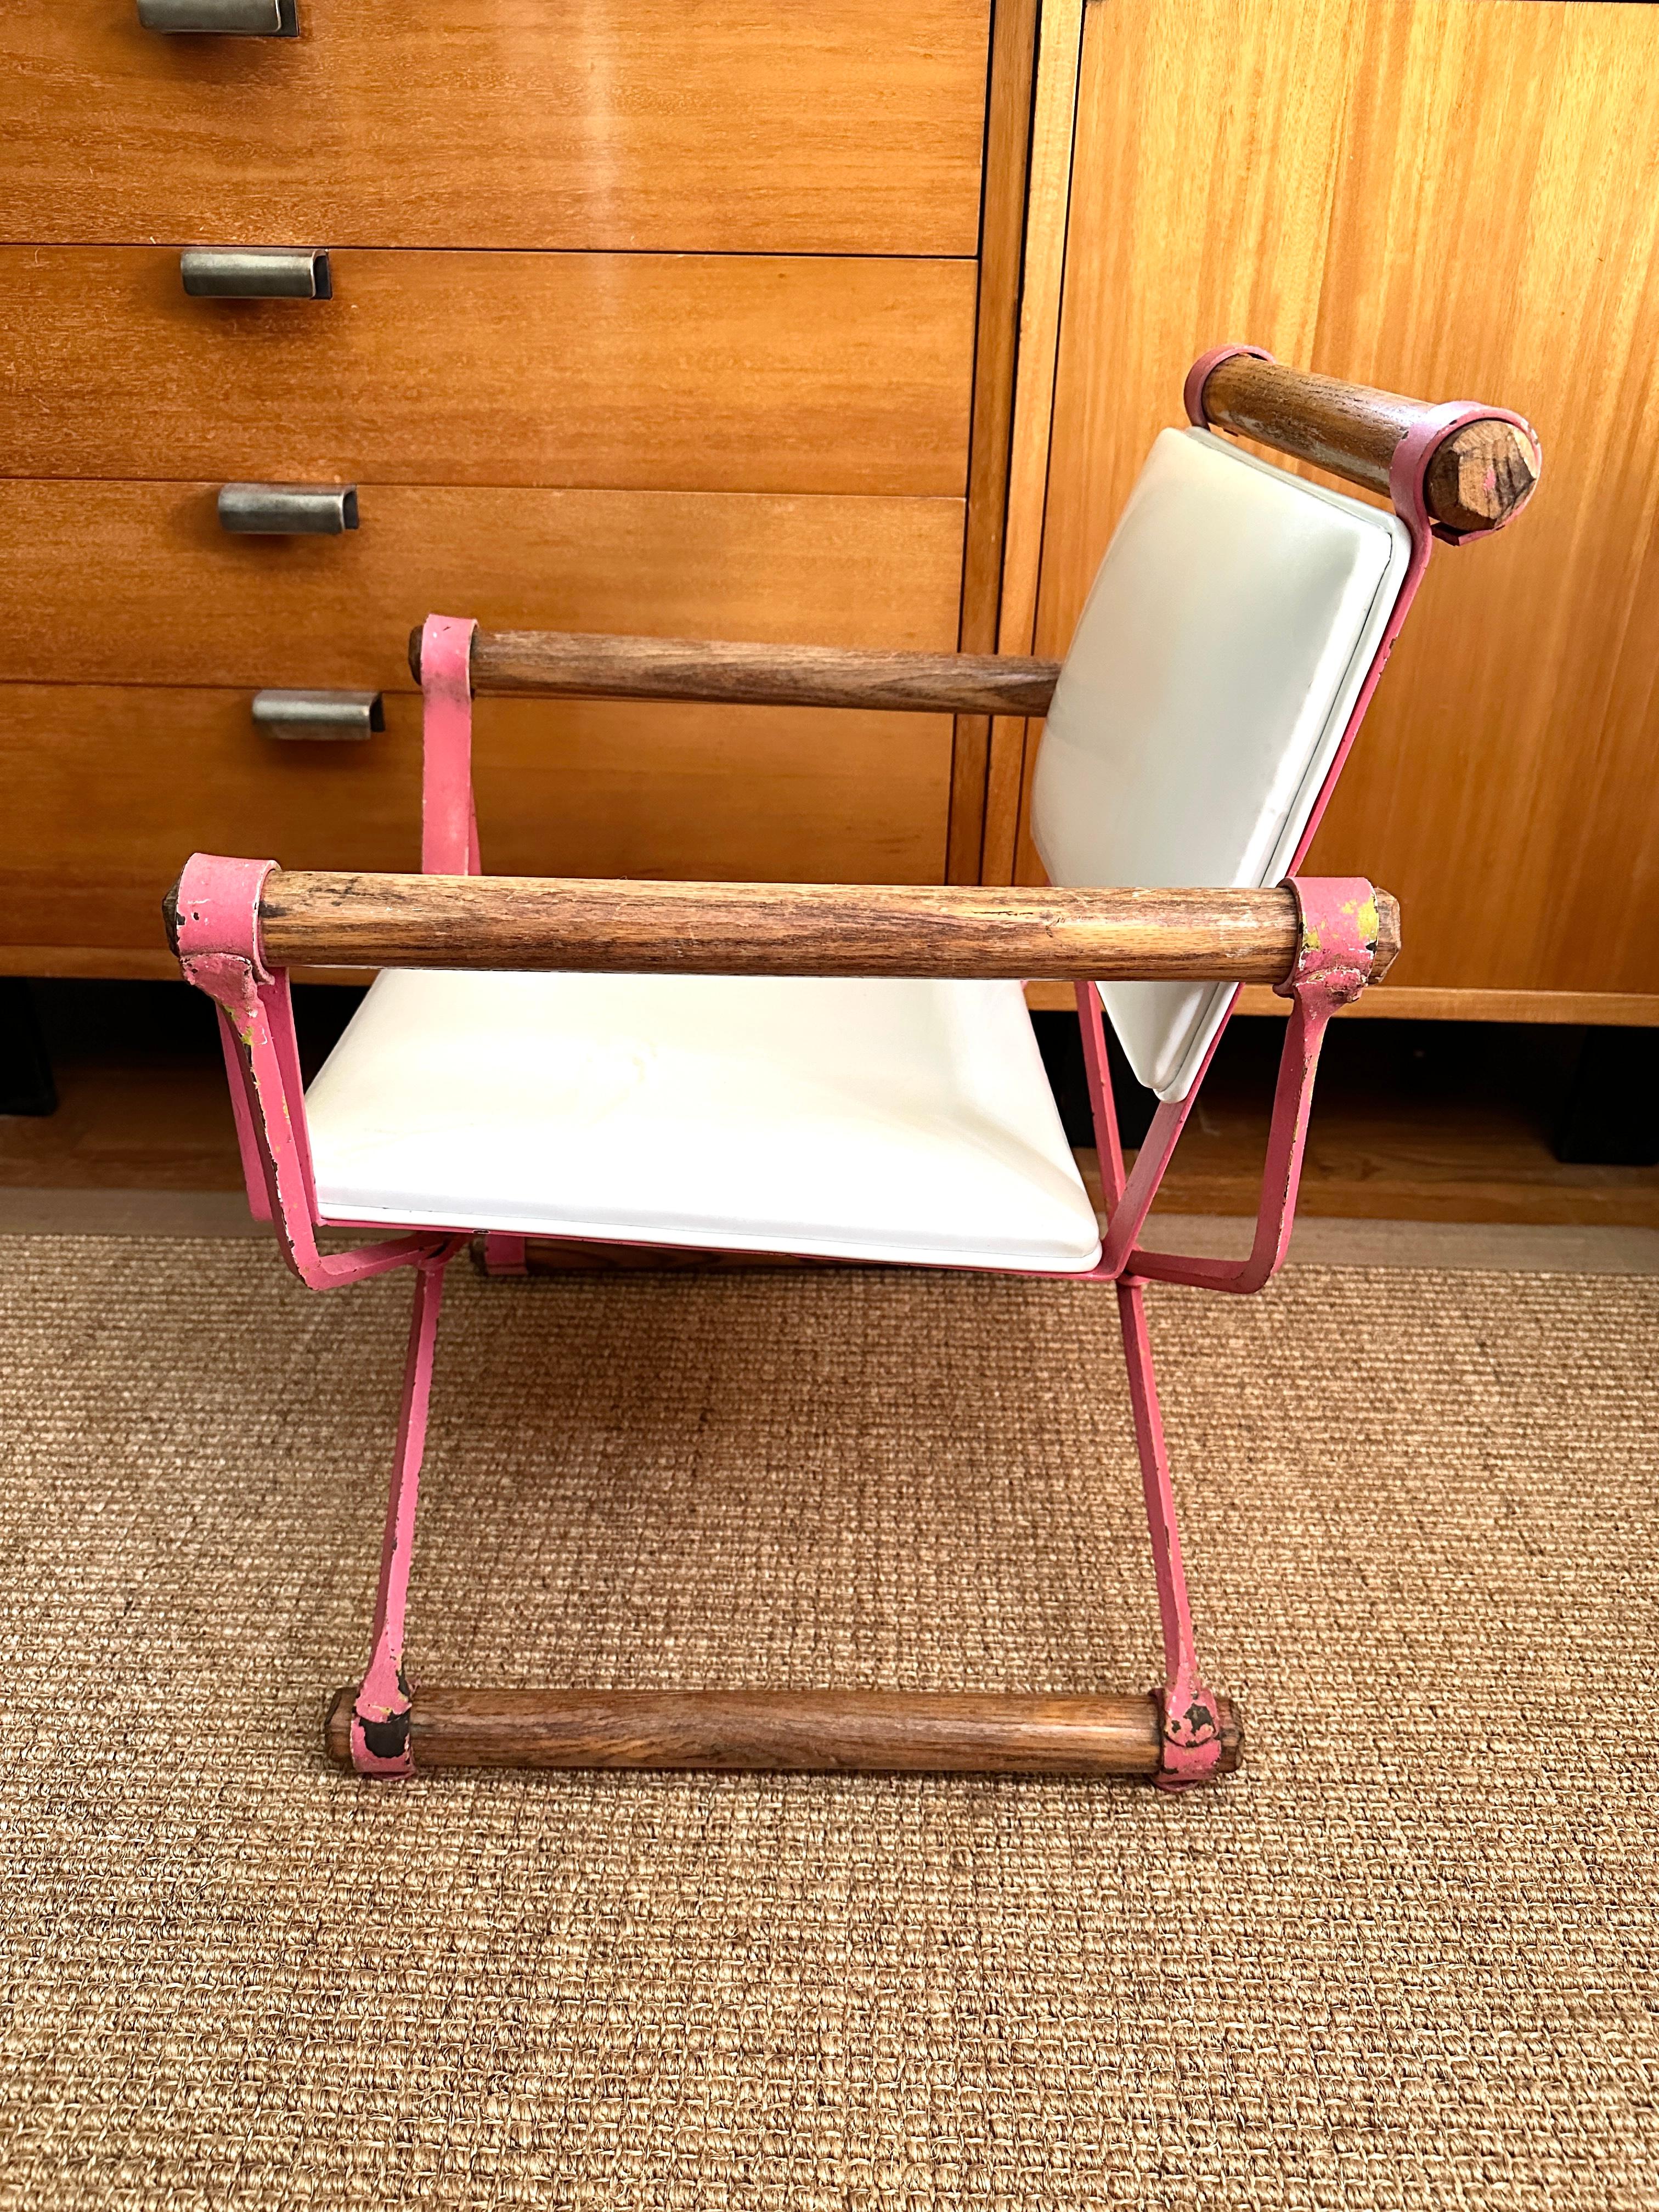 American Diminutive Childs Chair Designed by Cleo Baldon for Terra For Sale